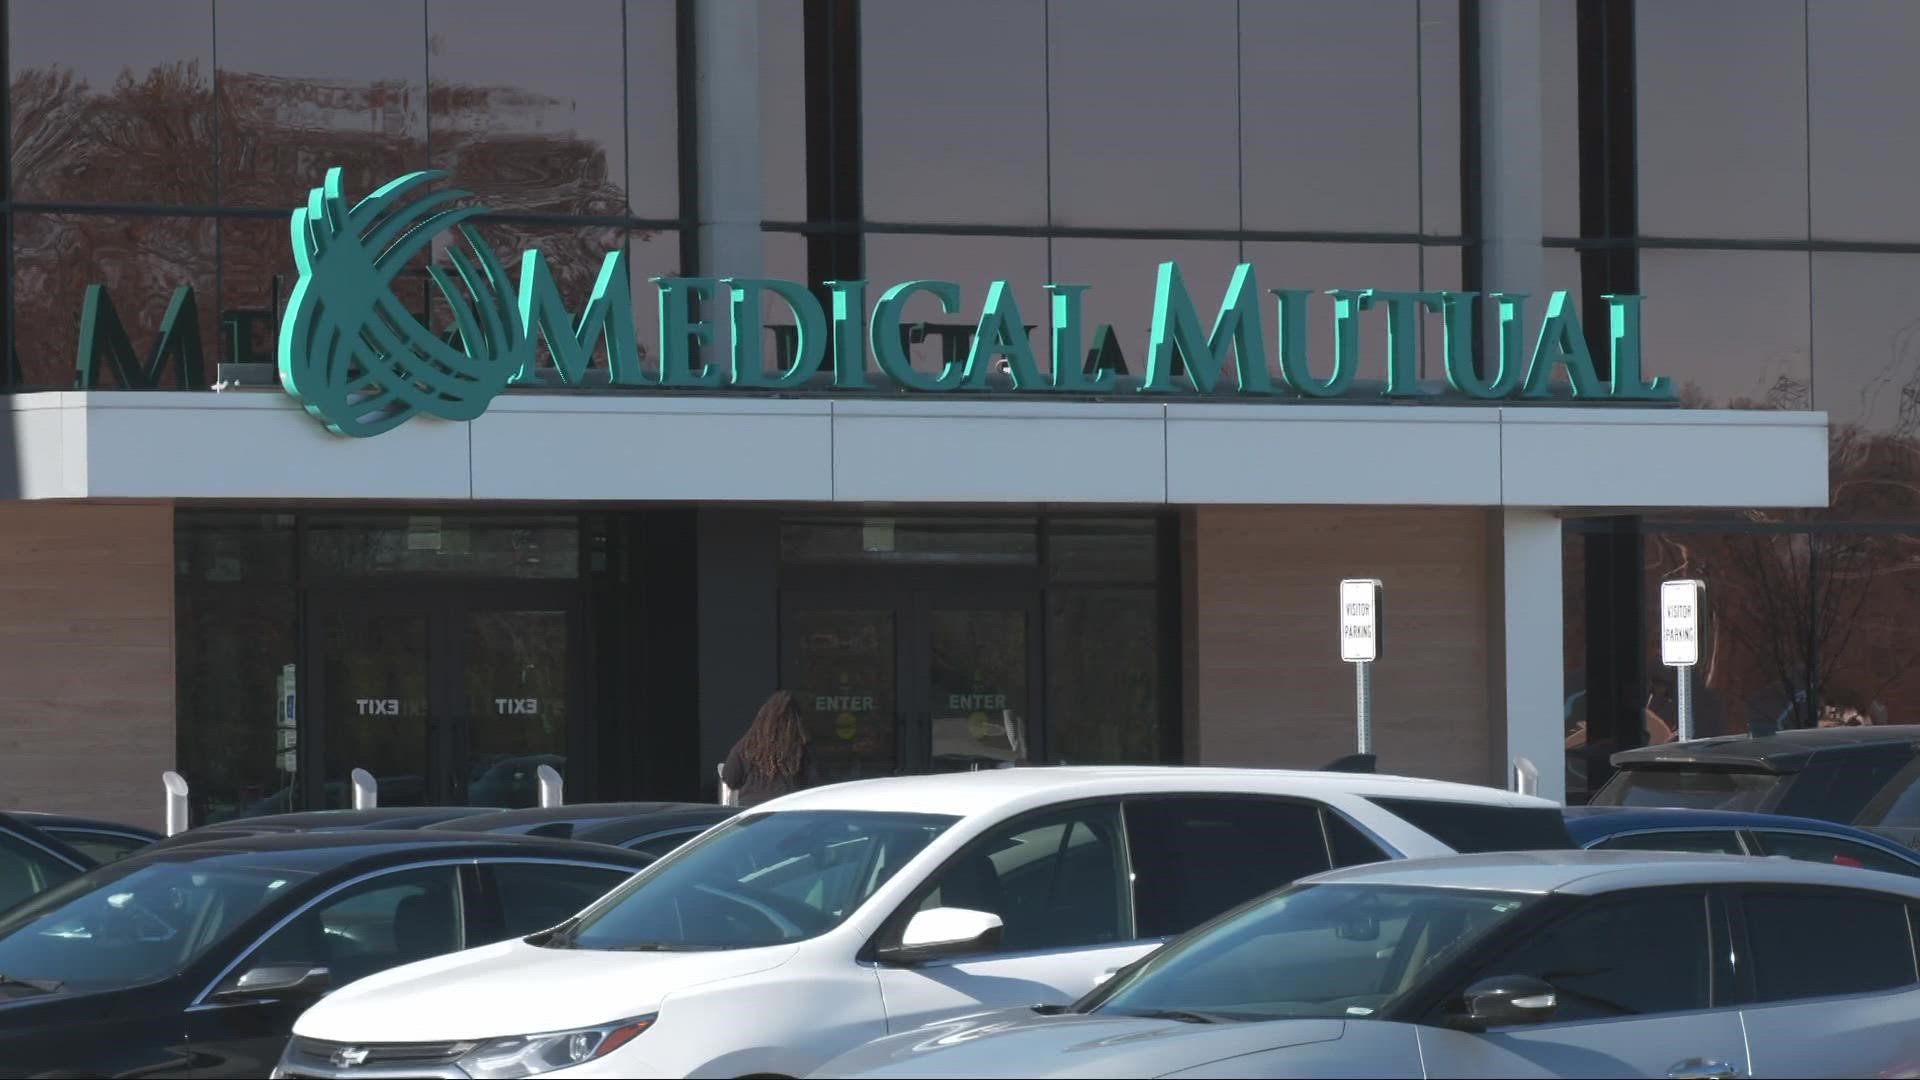 Medical Mutual's headquarters will be located at the site of the former American Greetings headquarters at the start of 2023.